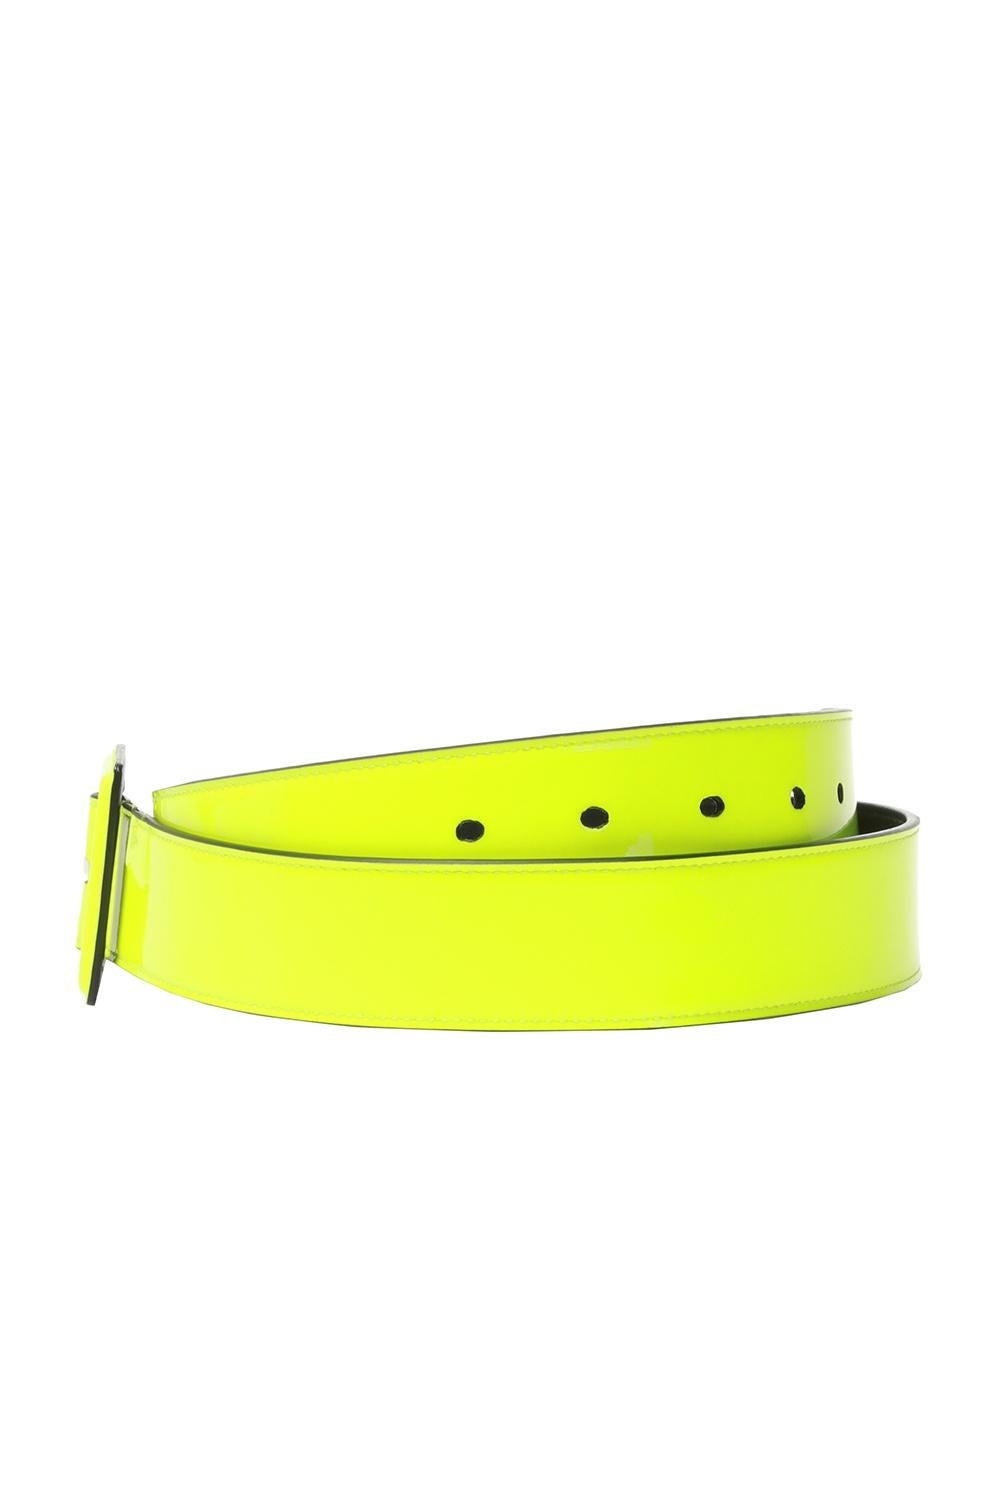 Saint Laurent Runway Neon Yellow Square Buckle Patent Leather Belt

As seen on the Runway, this belt will easily brighten up your wardrobe. Featuring neon yellow laminated leather and a square buckle. Brand new. Made in Italy.

Size: 85